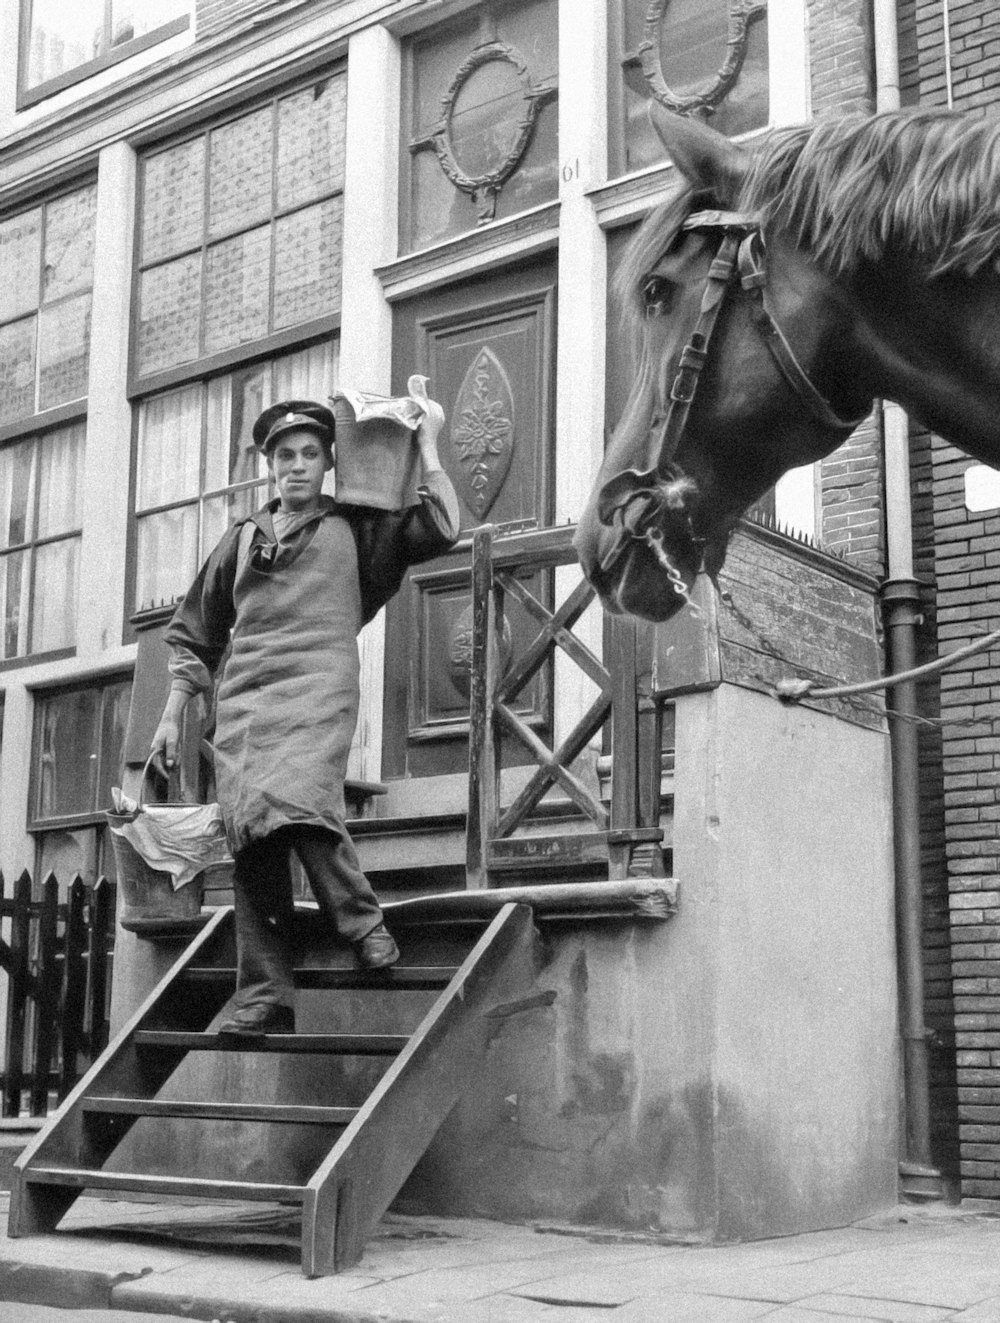 a black and white photo of a man standing next to a horse